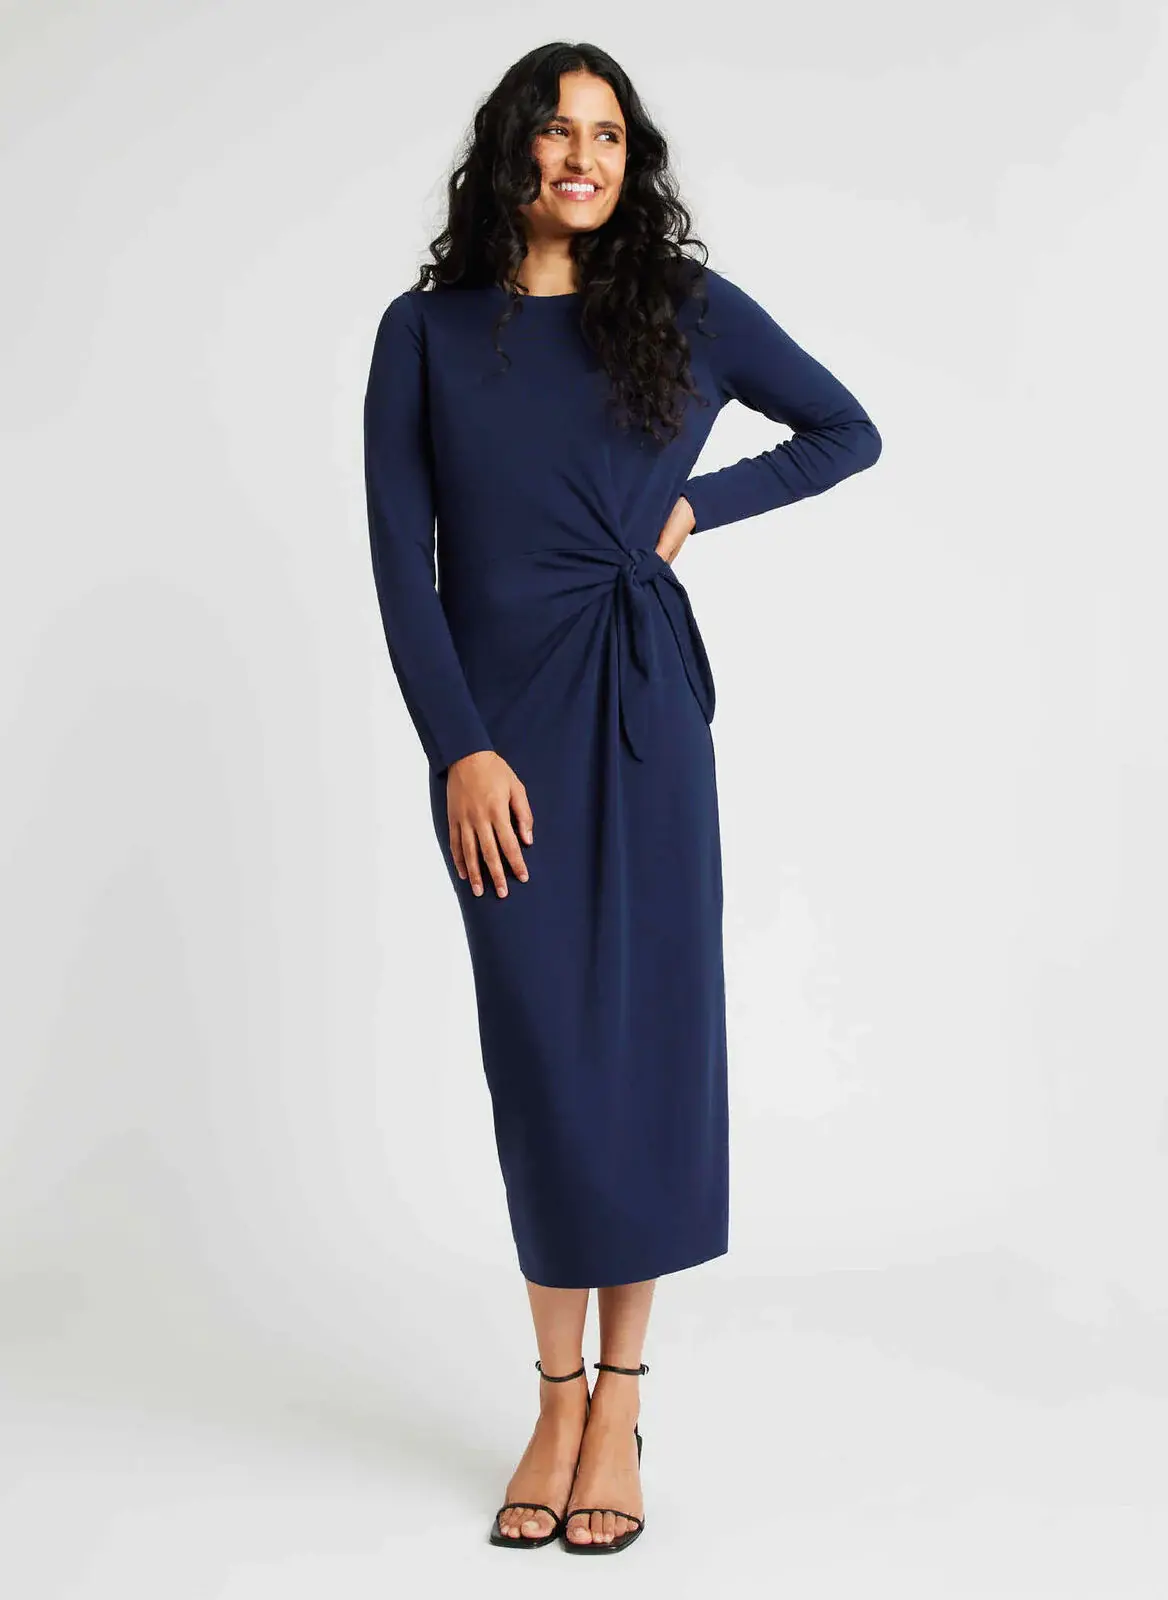 Kit And Ace Brushed Long Sleeve Tie Dress. 1